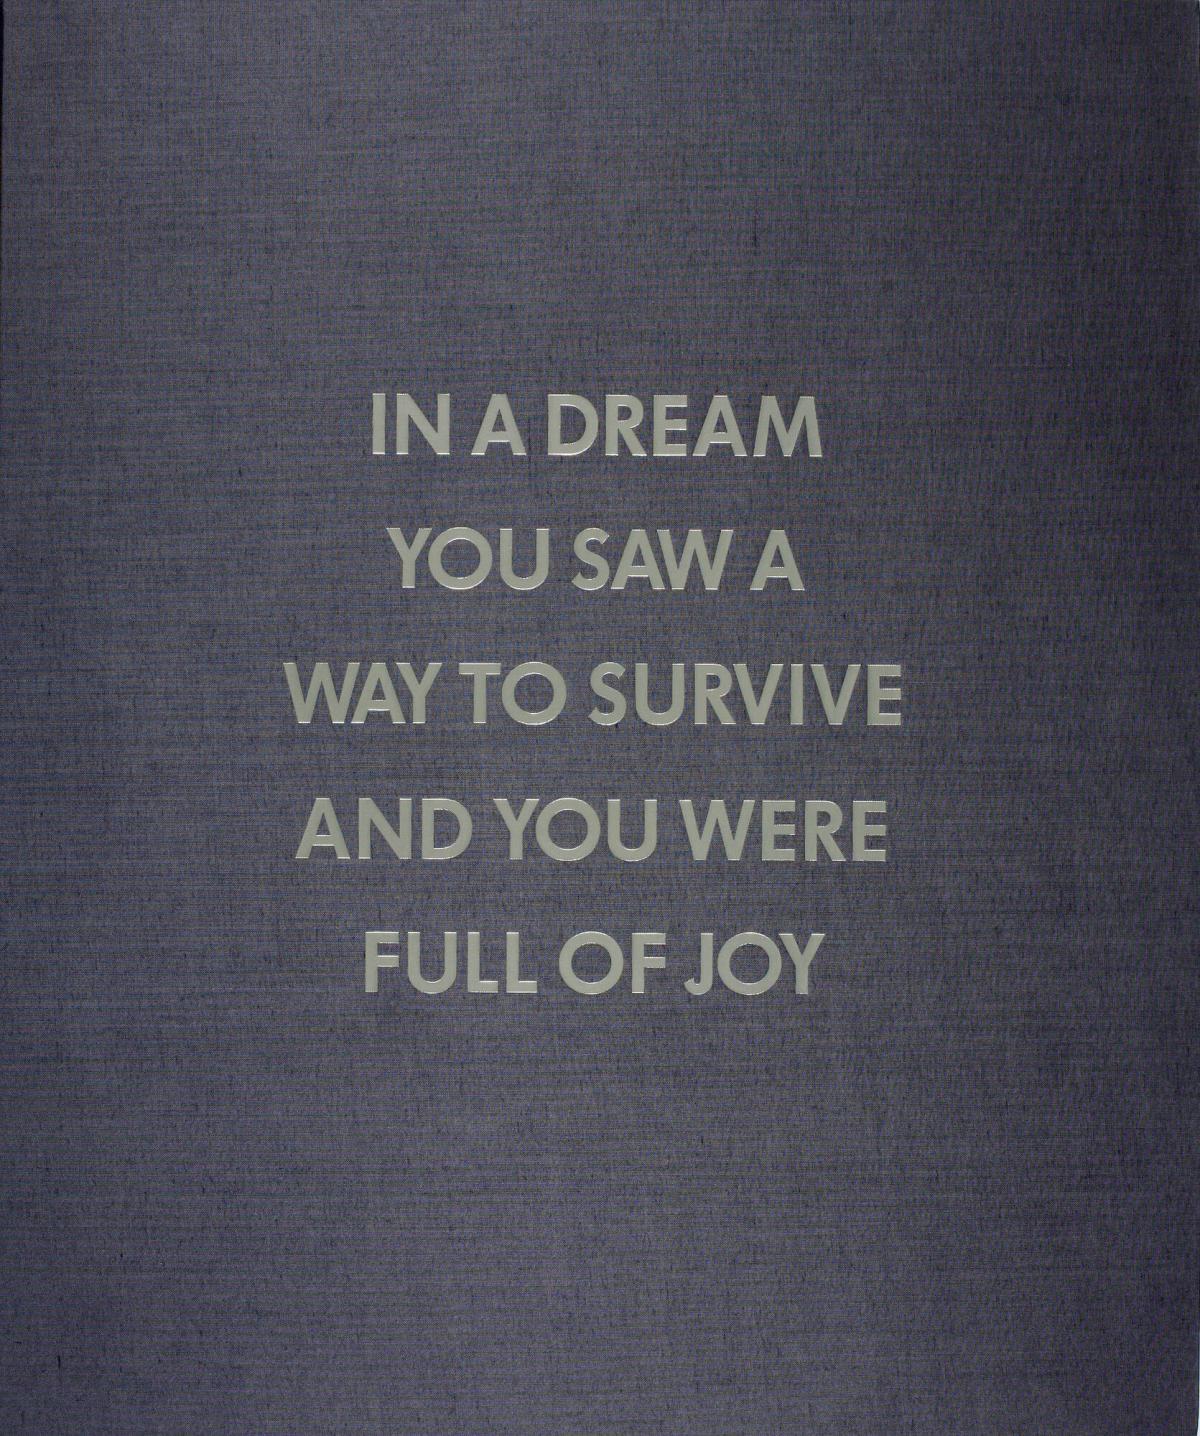 Section from the "Survival Series," from the portfolio In a Dream You Saw a Way to Survive and You Were Full of Joy